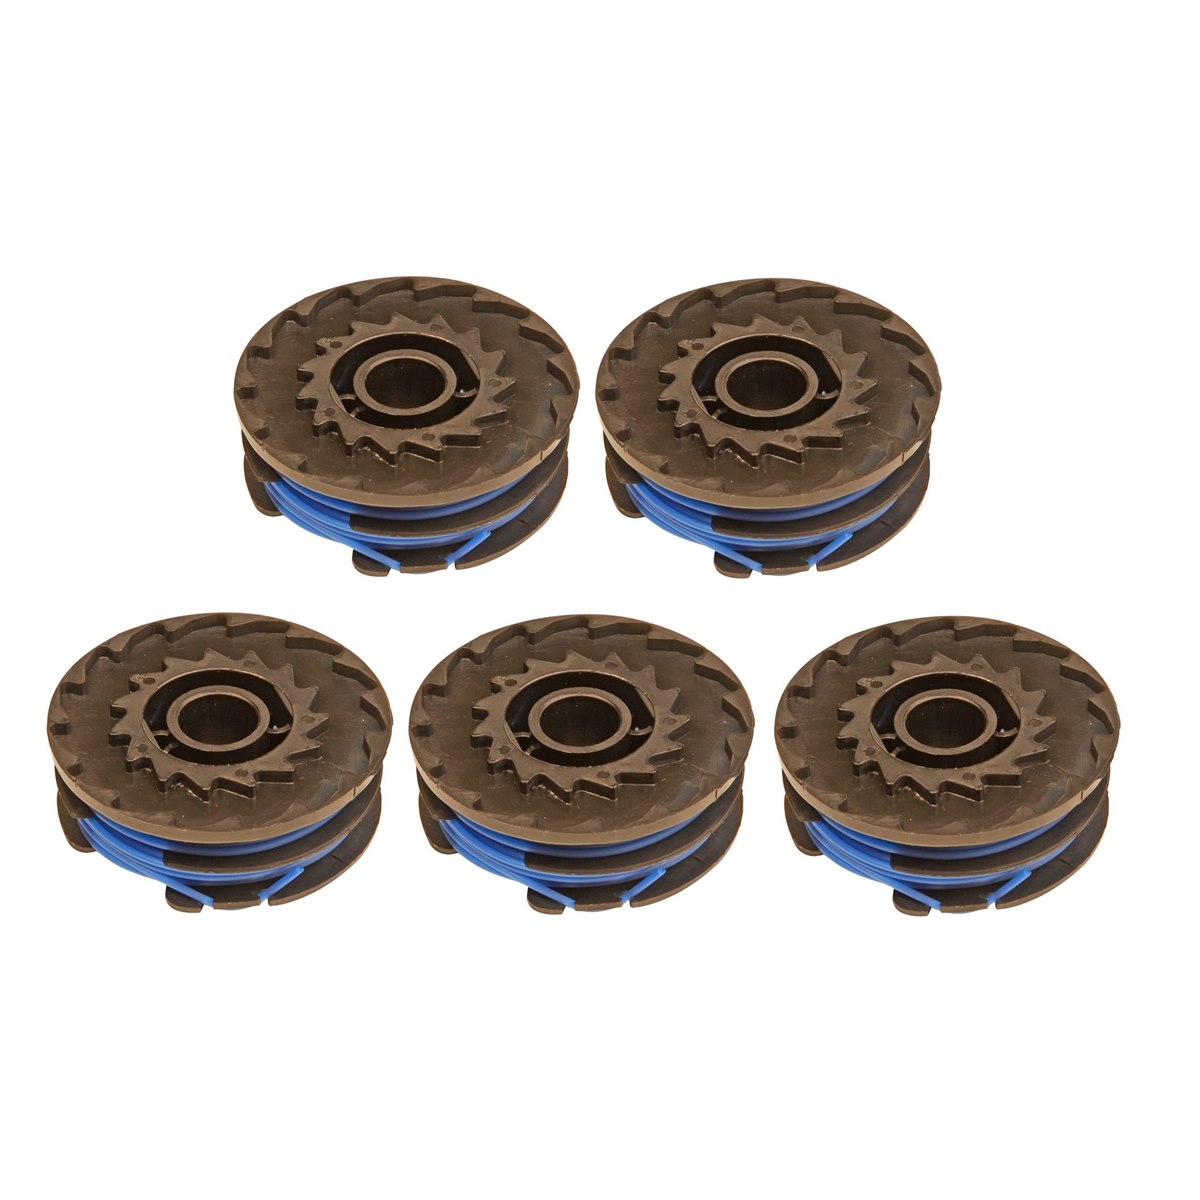 Case of 5 x ALM FL289 Spool and Line for Flymo Double Auto-Feed Models